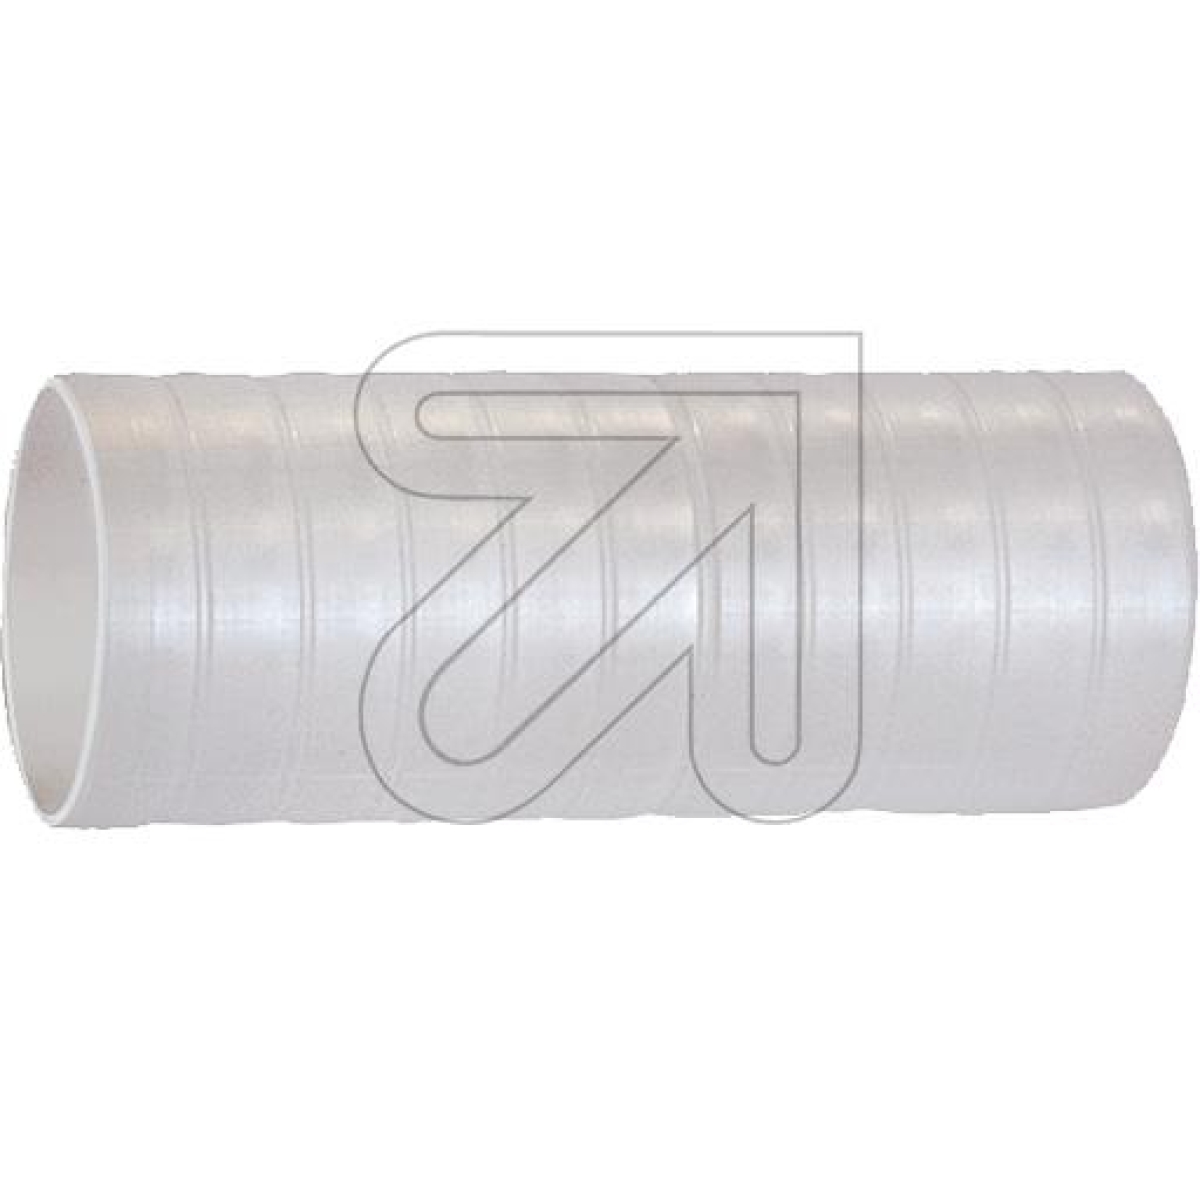 FRÄNKISCHEConnection sleeve for RMKu-E 25 259 30 025 (for EYLF 25)-Price for 10 pcs.Article-No: 199940